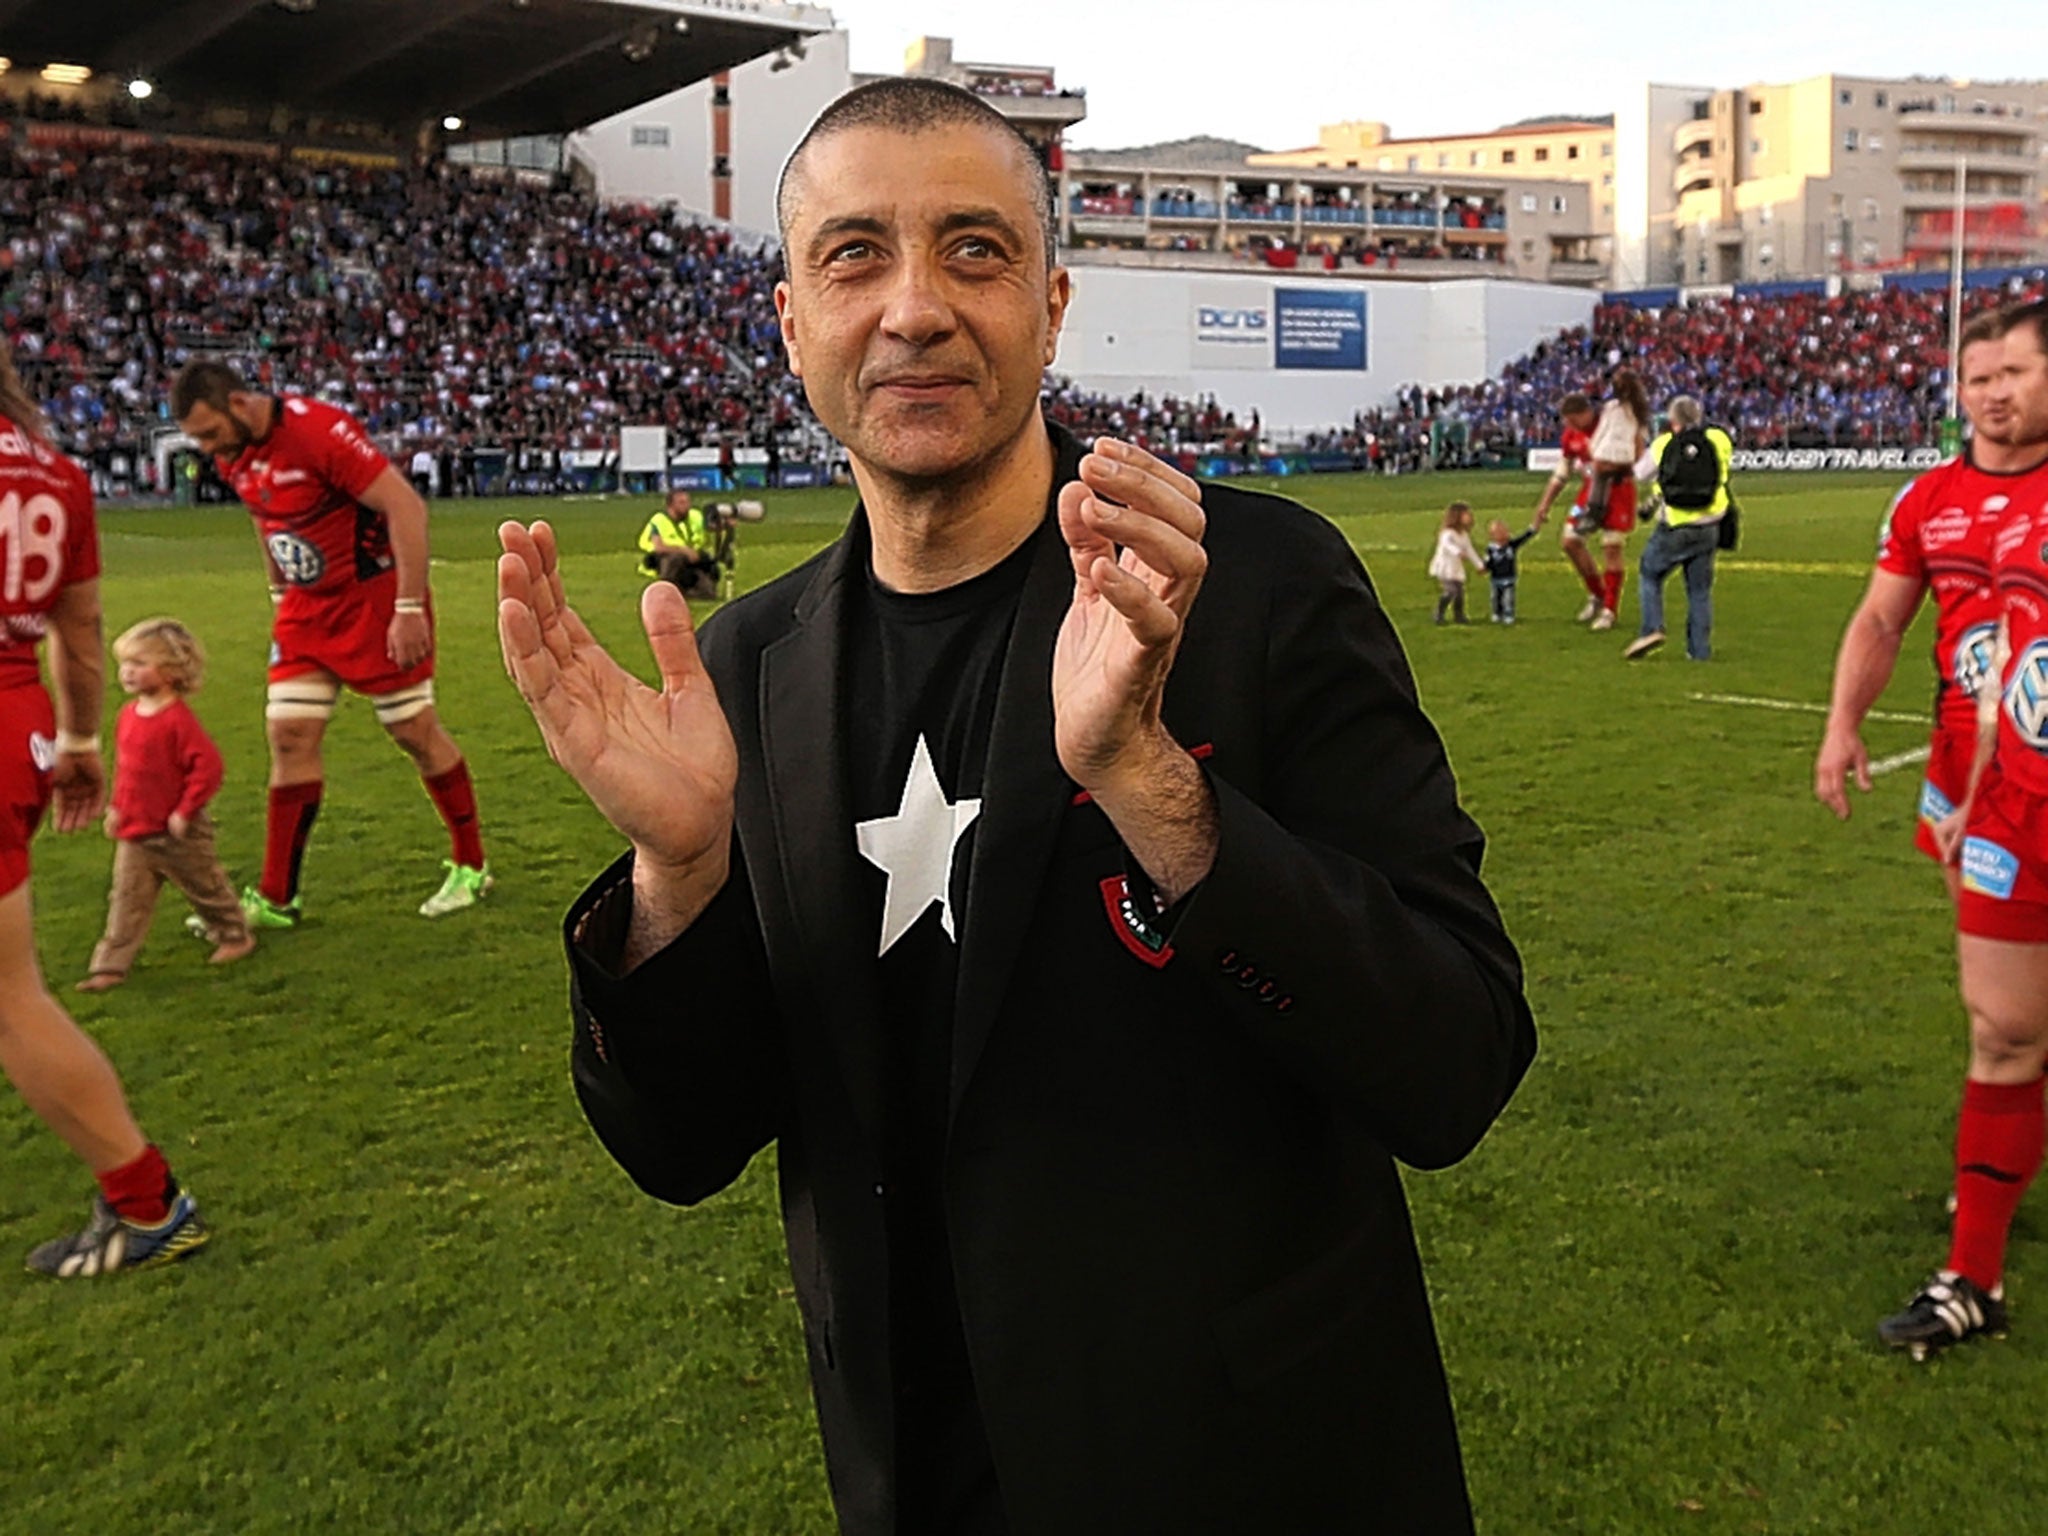 Toulon’s president Mourad Boudjellal is a controversial figure